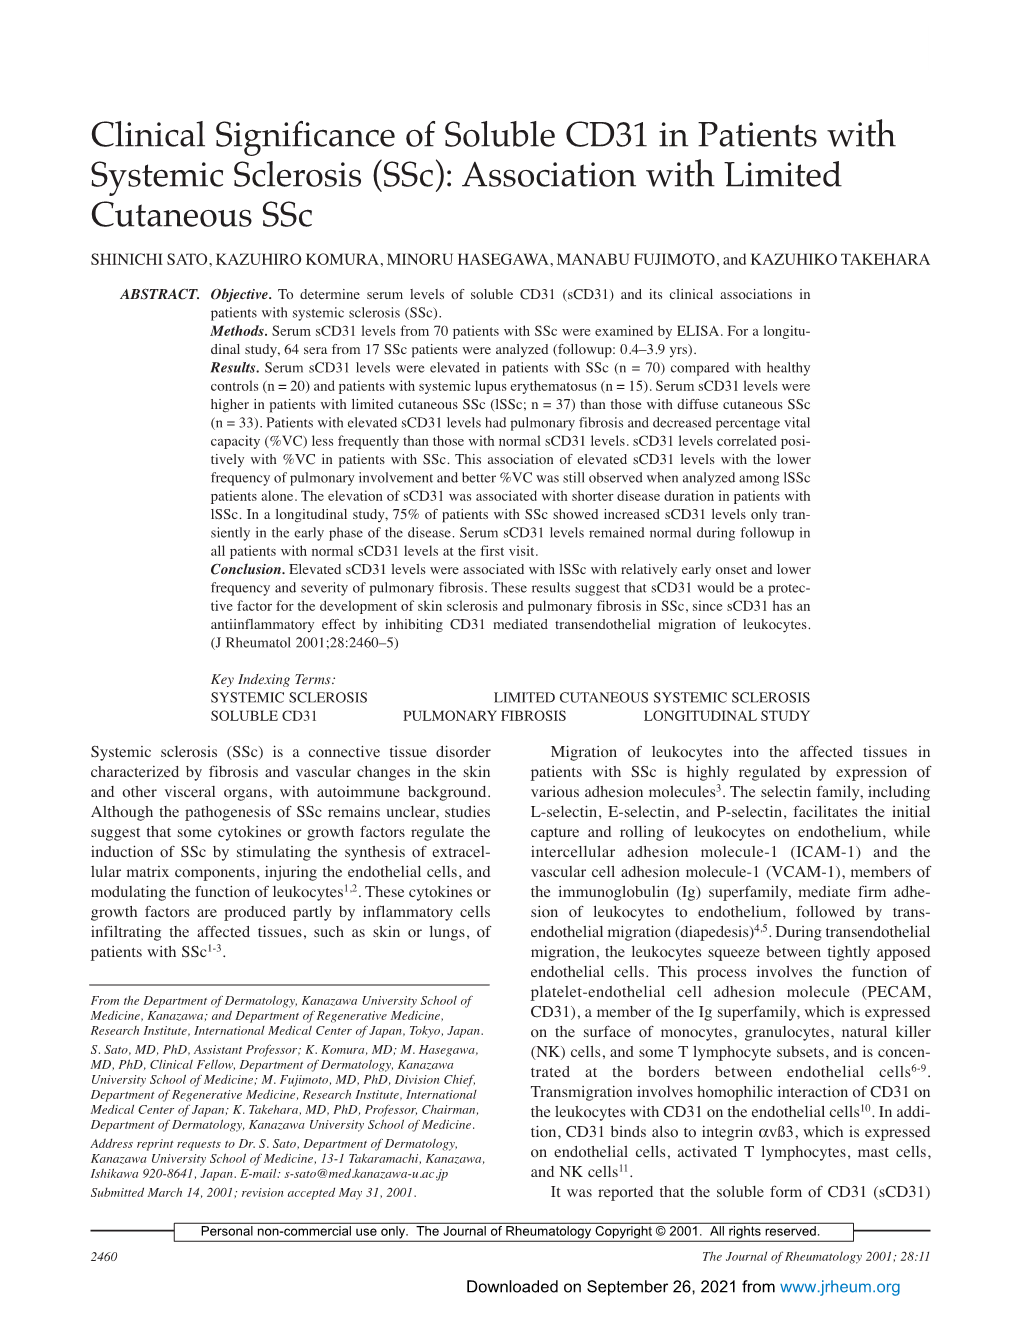 Clinical Significance of Soluble CD31 in Patients with Systemic Sclerosis